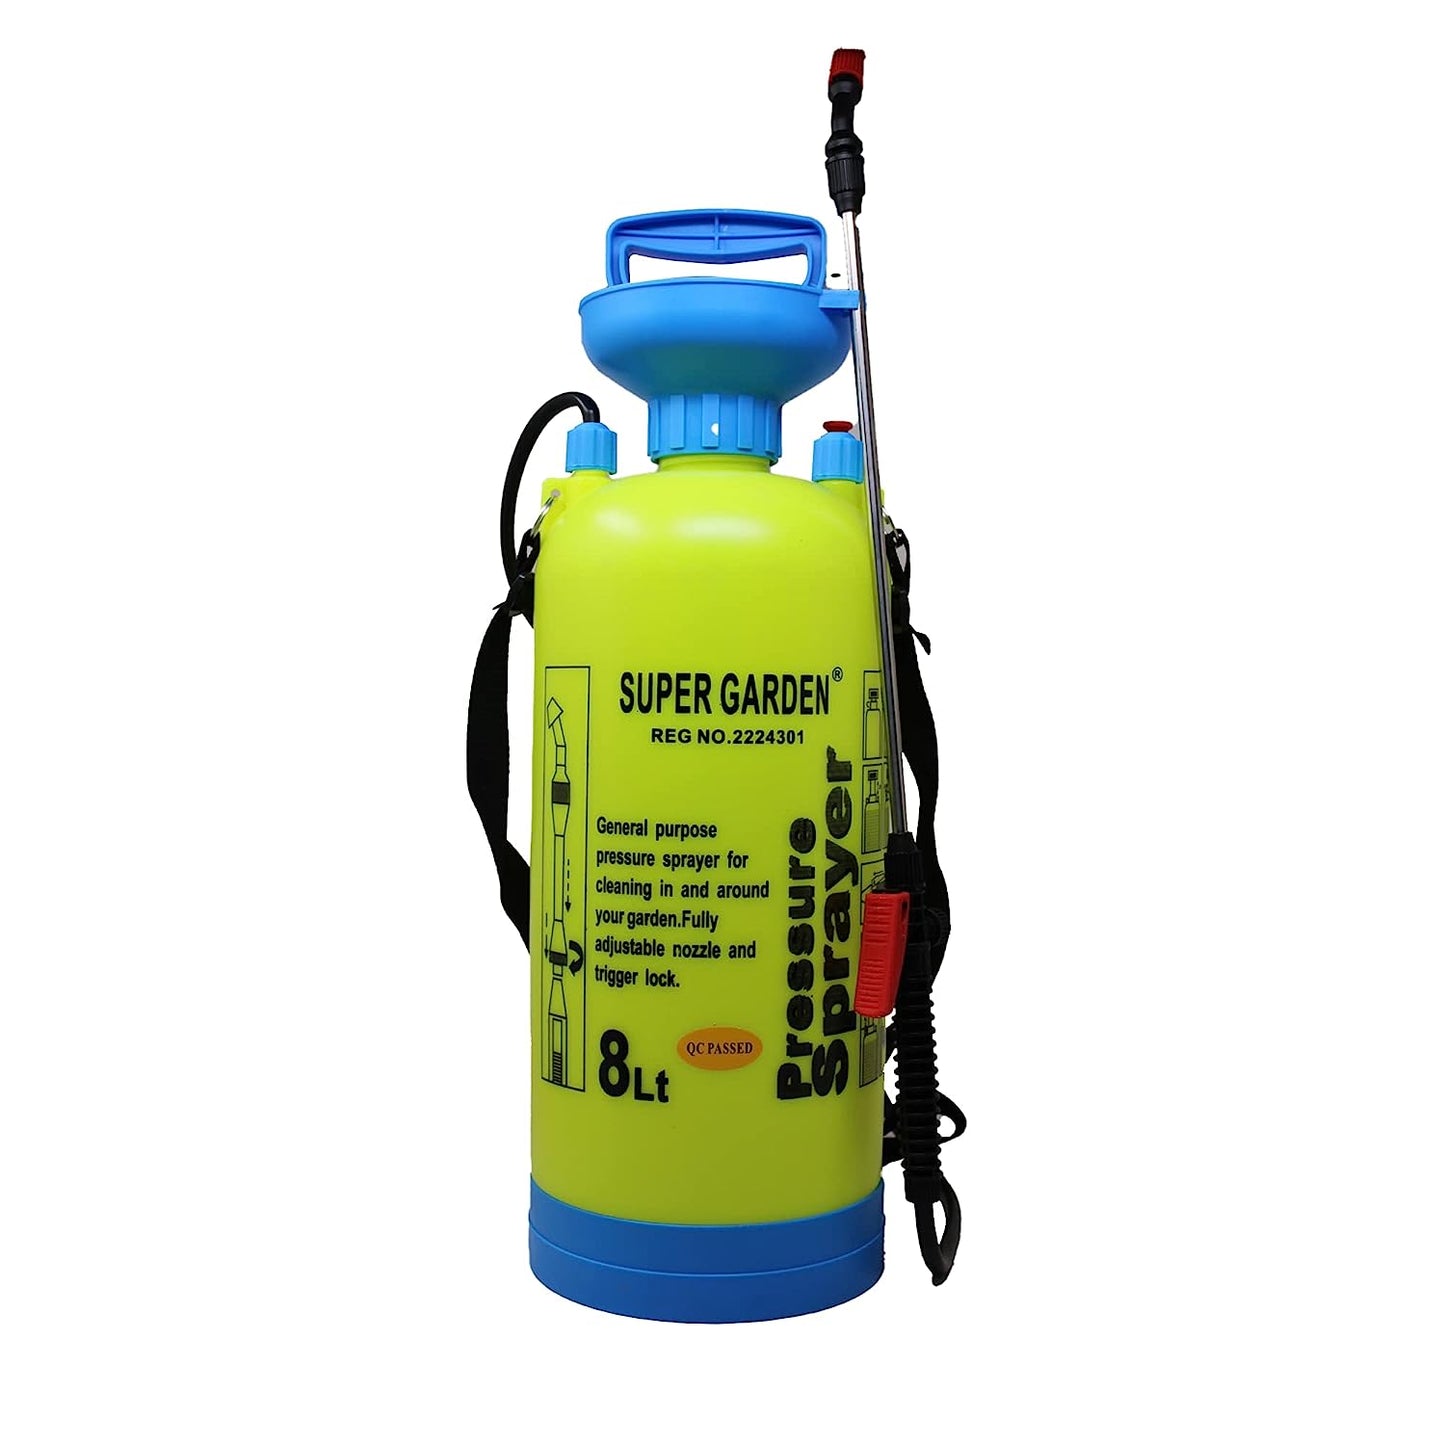 AEGON AMP8L - 8 Litre Pressure Garden Manual Sprayer for Agricultural, Home, Plant, and Pesticide Spraying